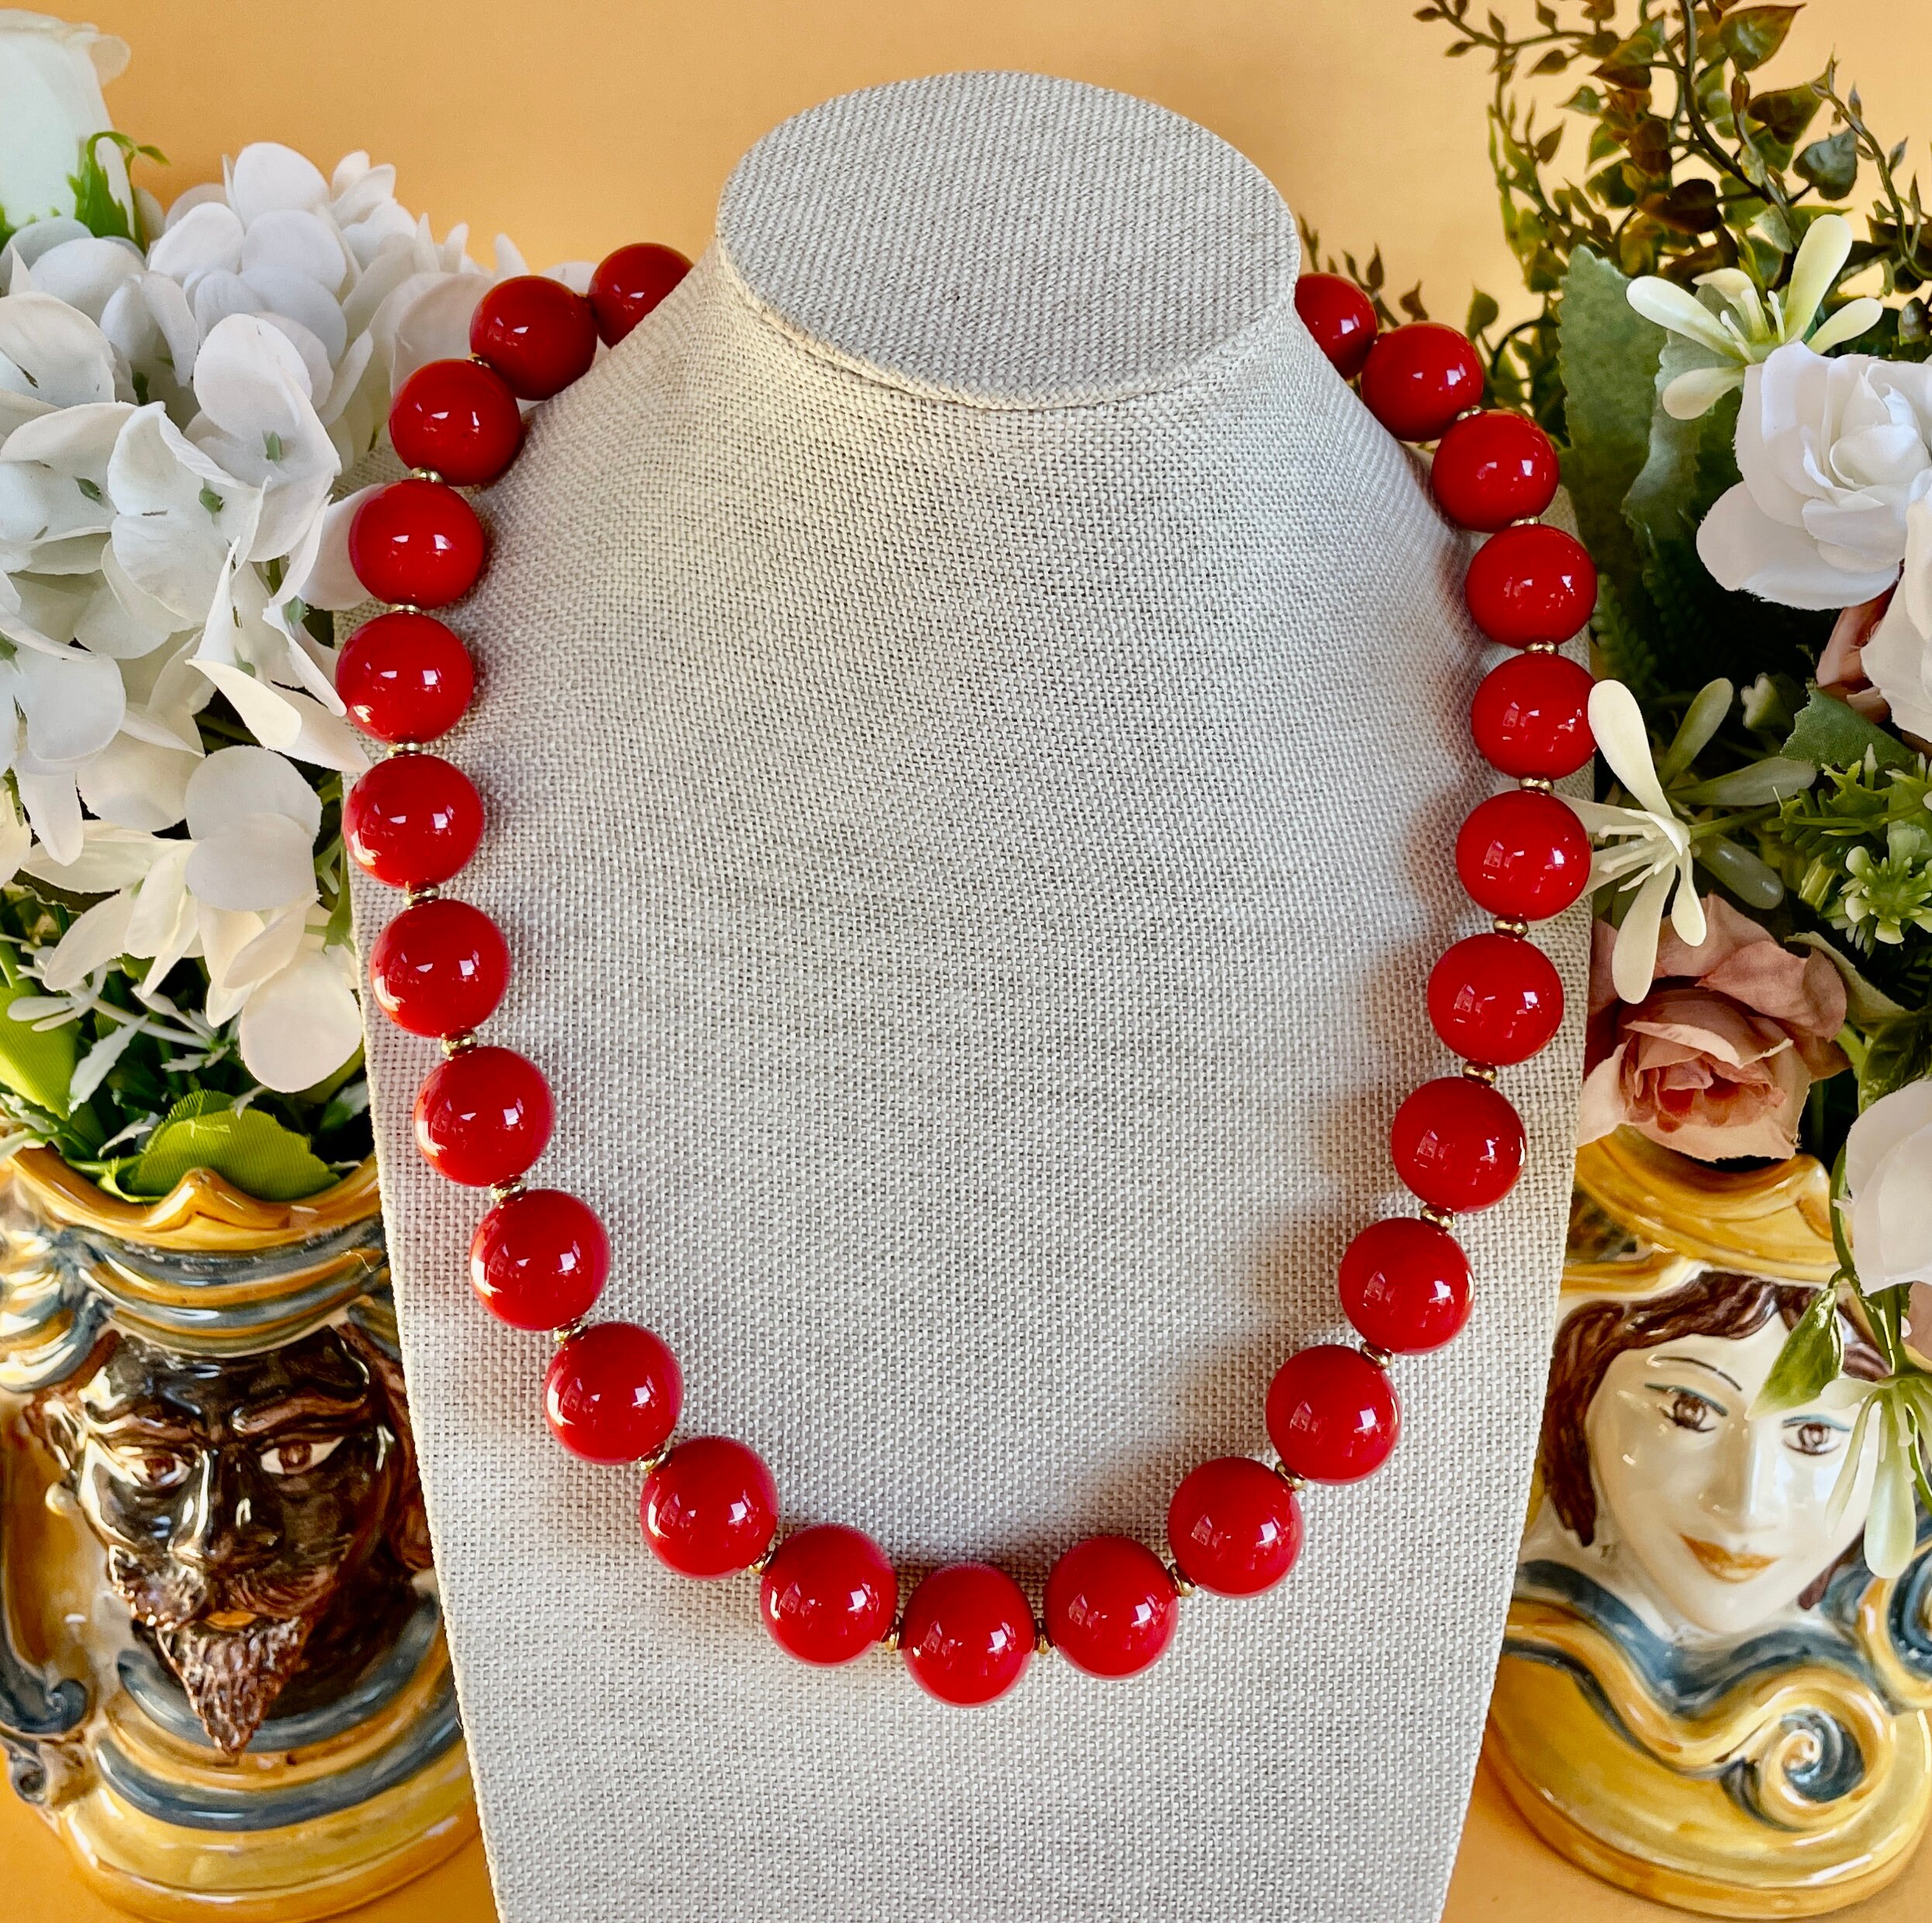 Big Red Beaded Necklace, 24mm Red Beads Necklace, Red Choker